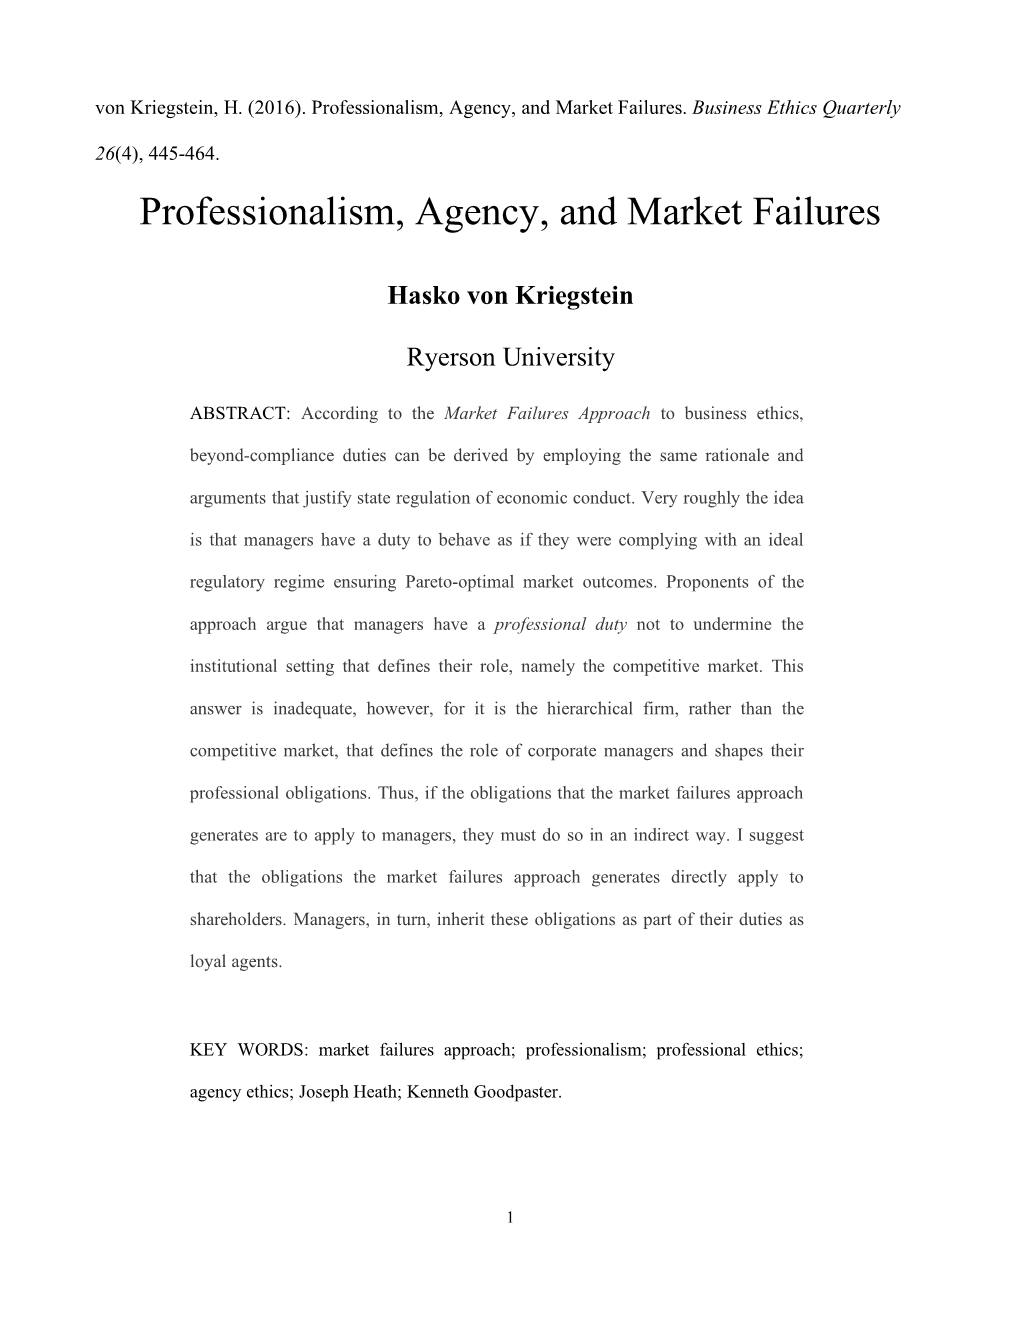 Professionalism, Agency, and Market Failures